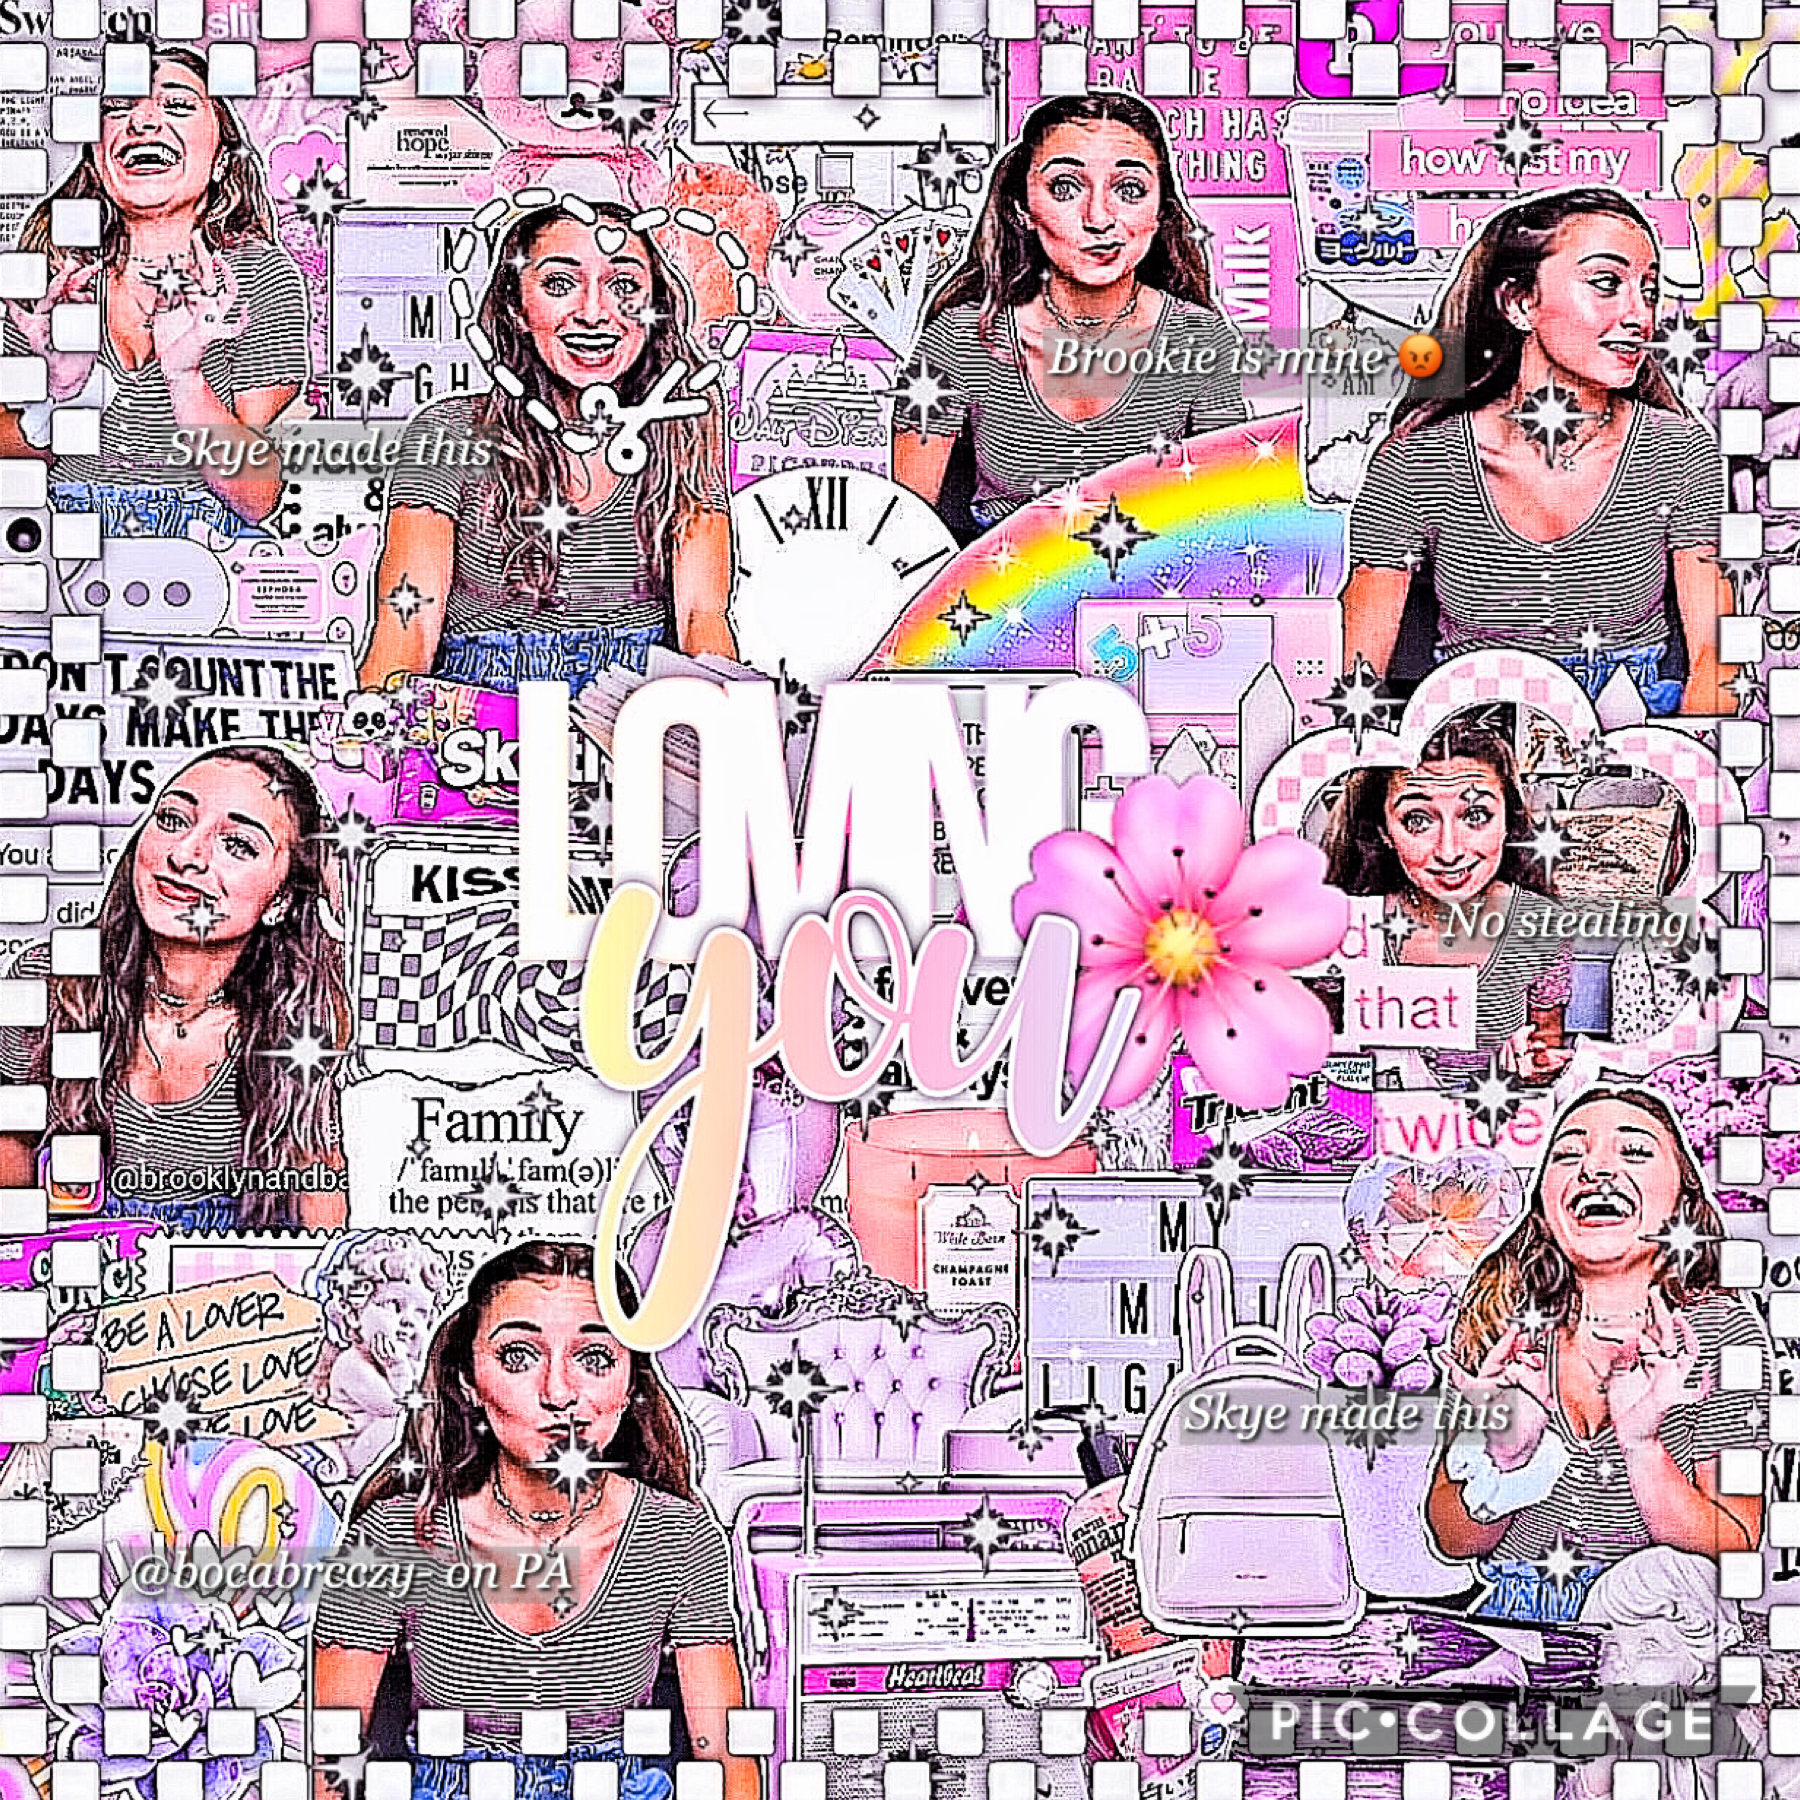 Heyy! So I haven’t posted on here in a while, so here ya go! This is an edit I did a couple weeks ago of Brooklyn McKnight on PicsArt before I had to go on break! <33 